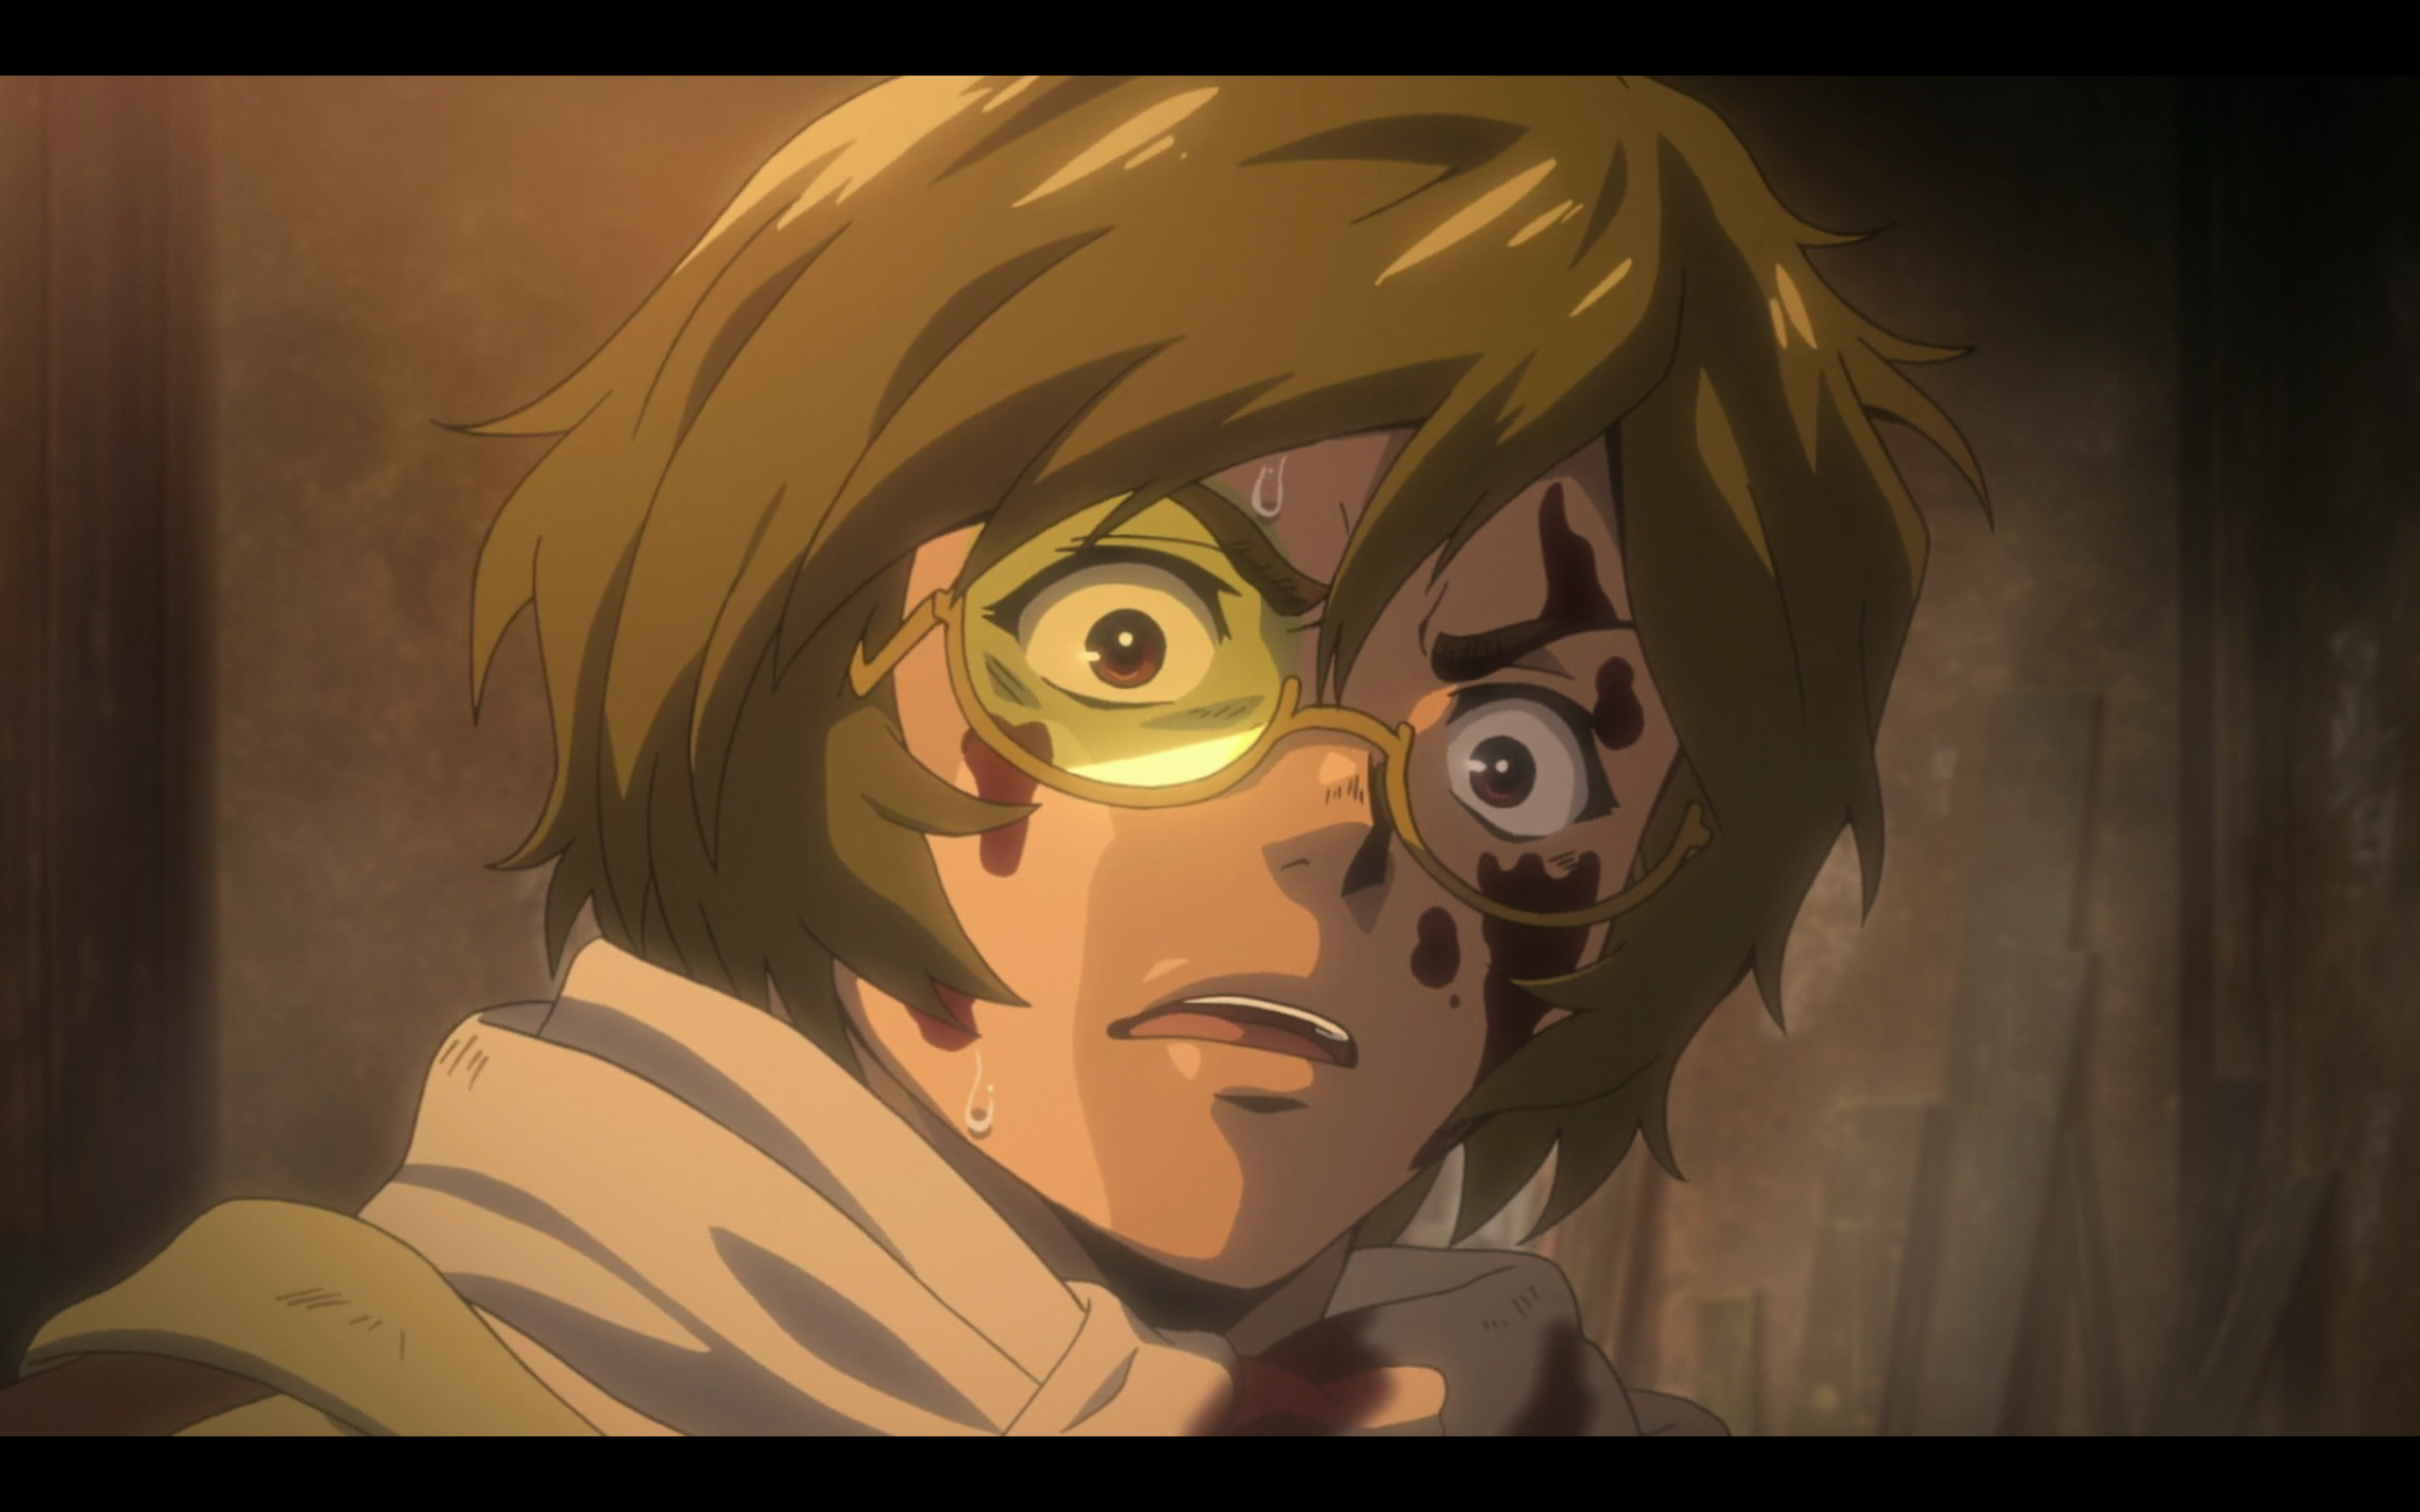 Episode Focus: Kabaneri of the Iron Fortress Episode 1 'Frightened Corpse